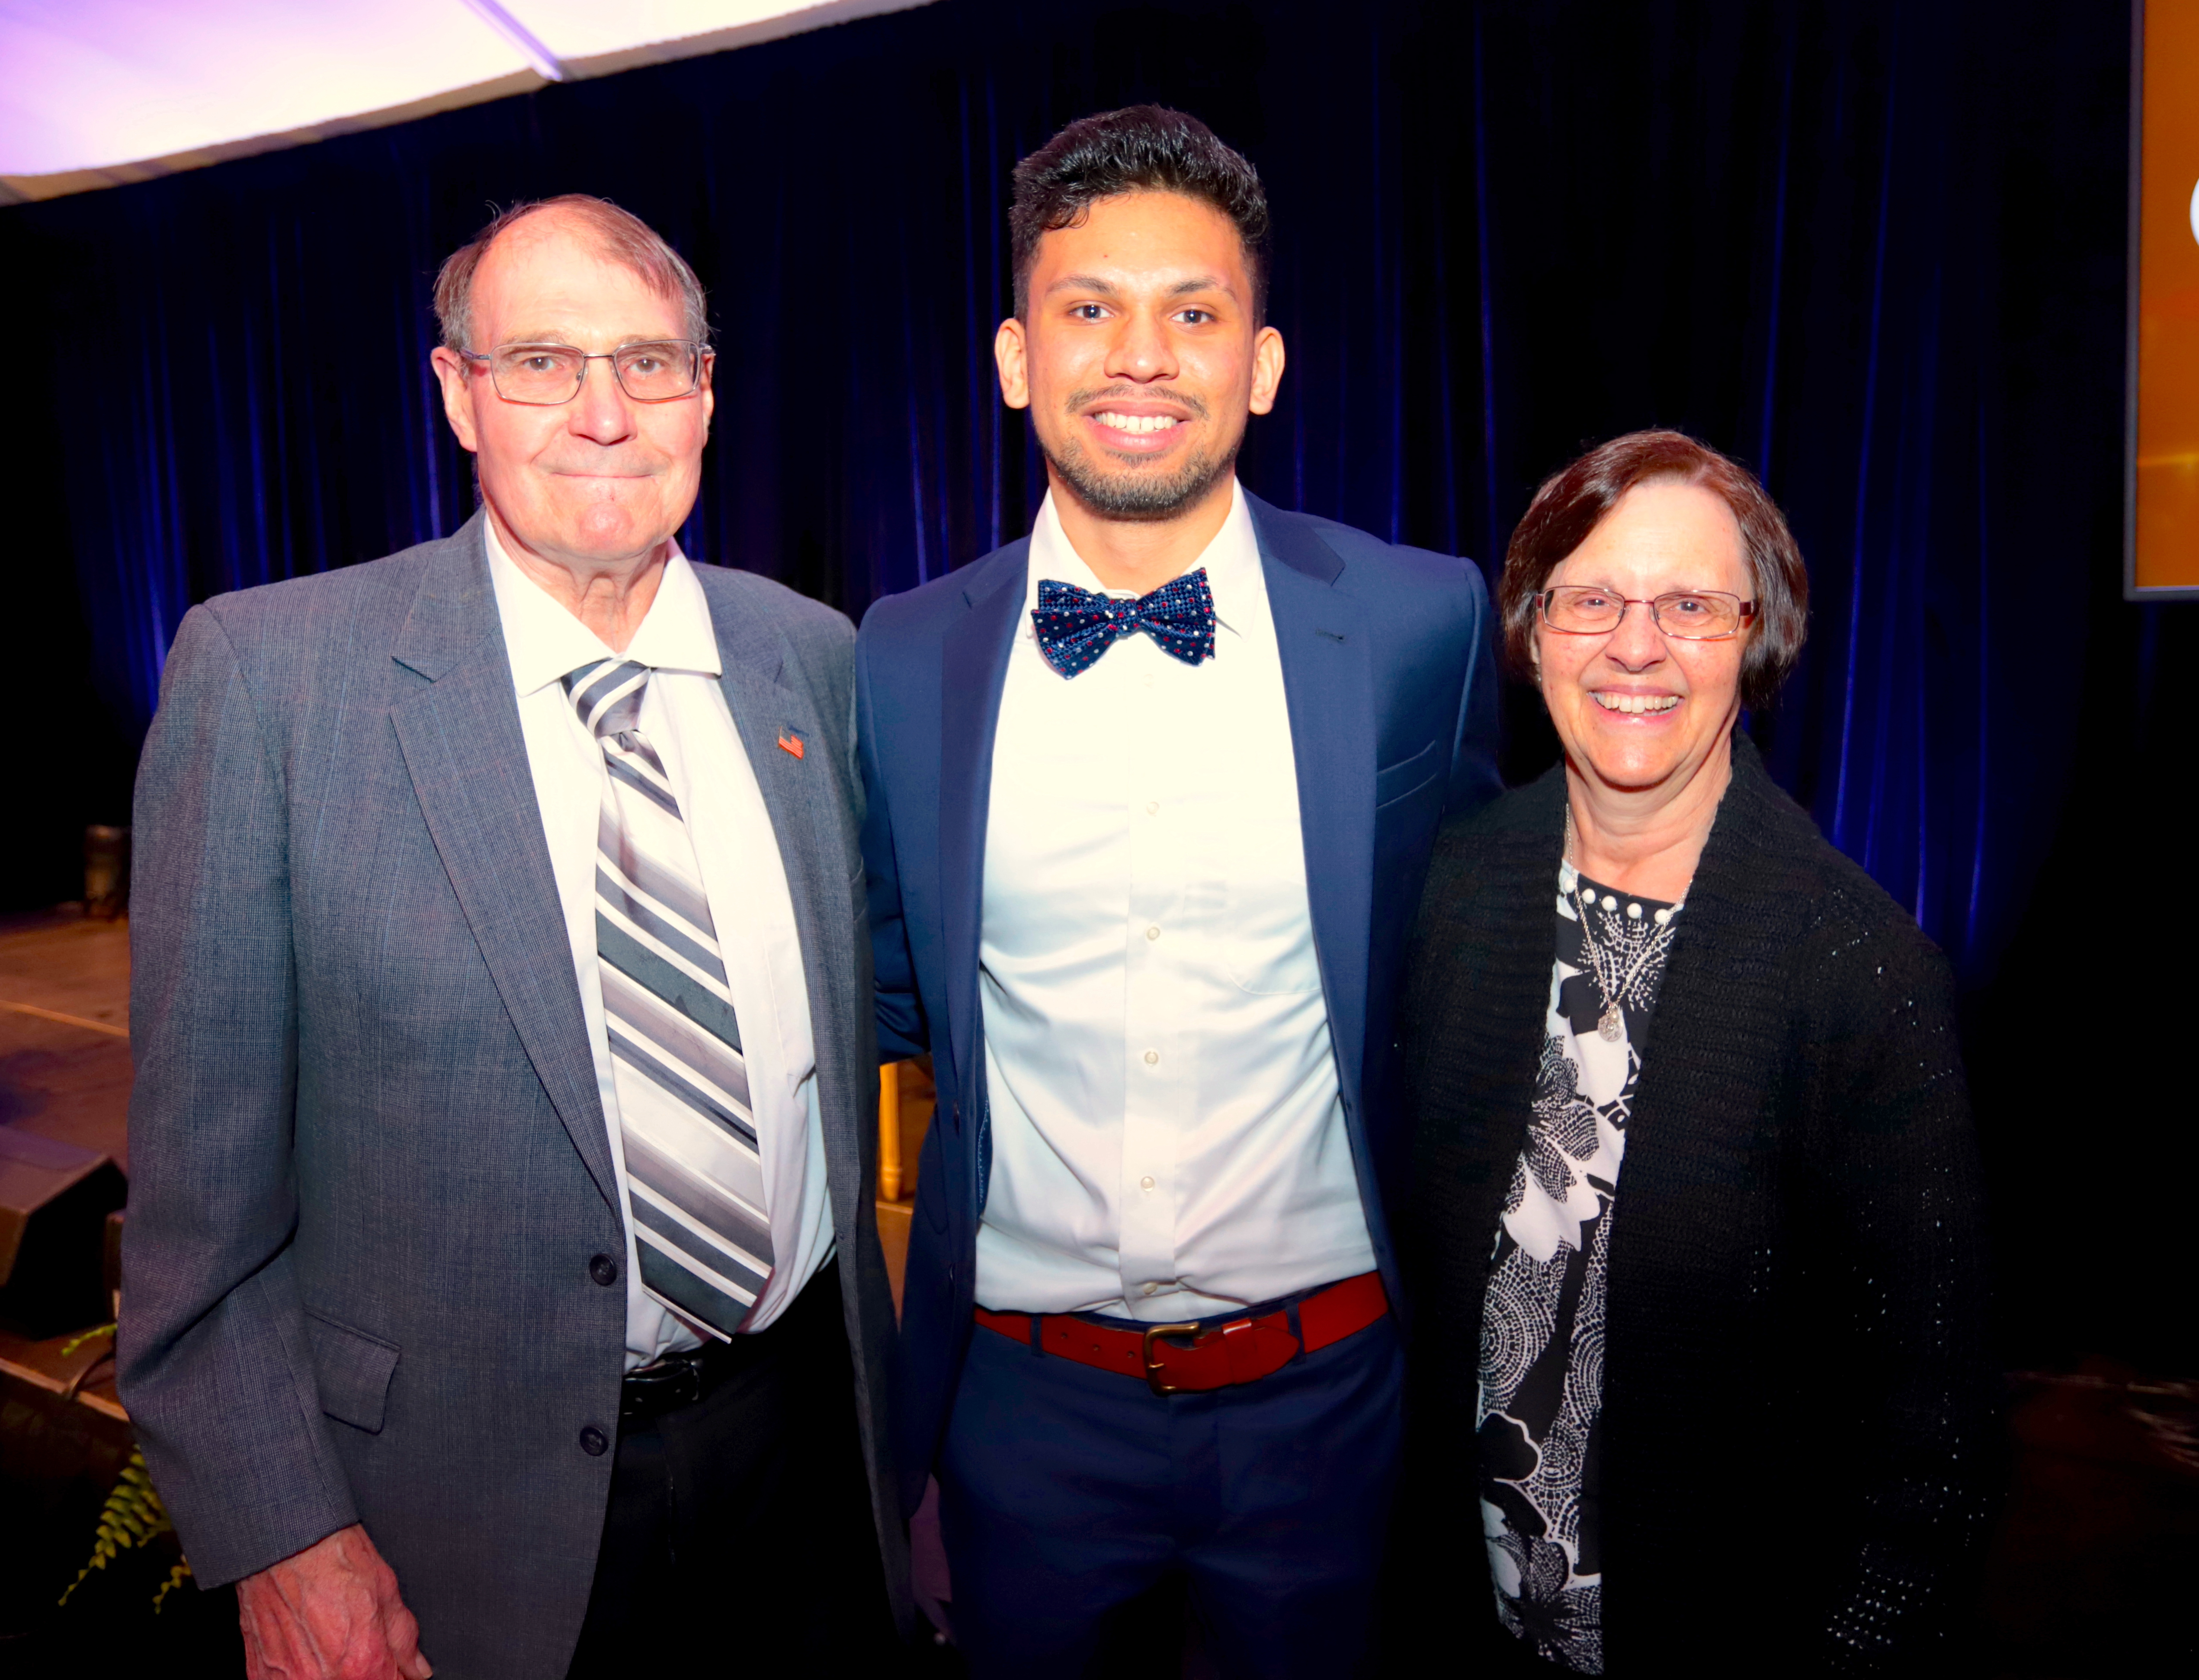 Sophomore Nicholas Barros ’24 posing with Clarence B. Campbell's son and his wife